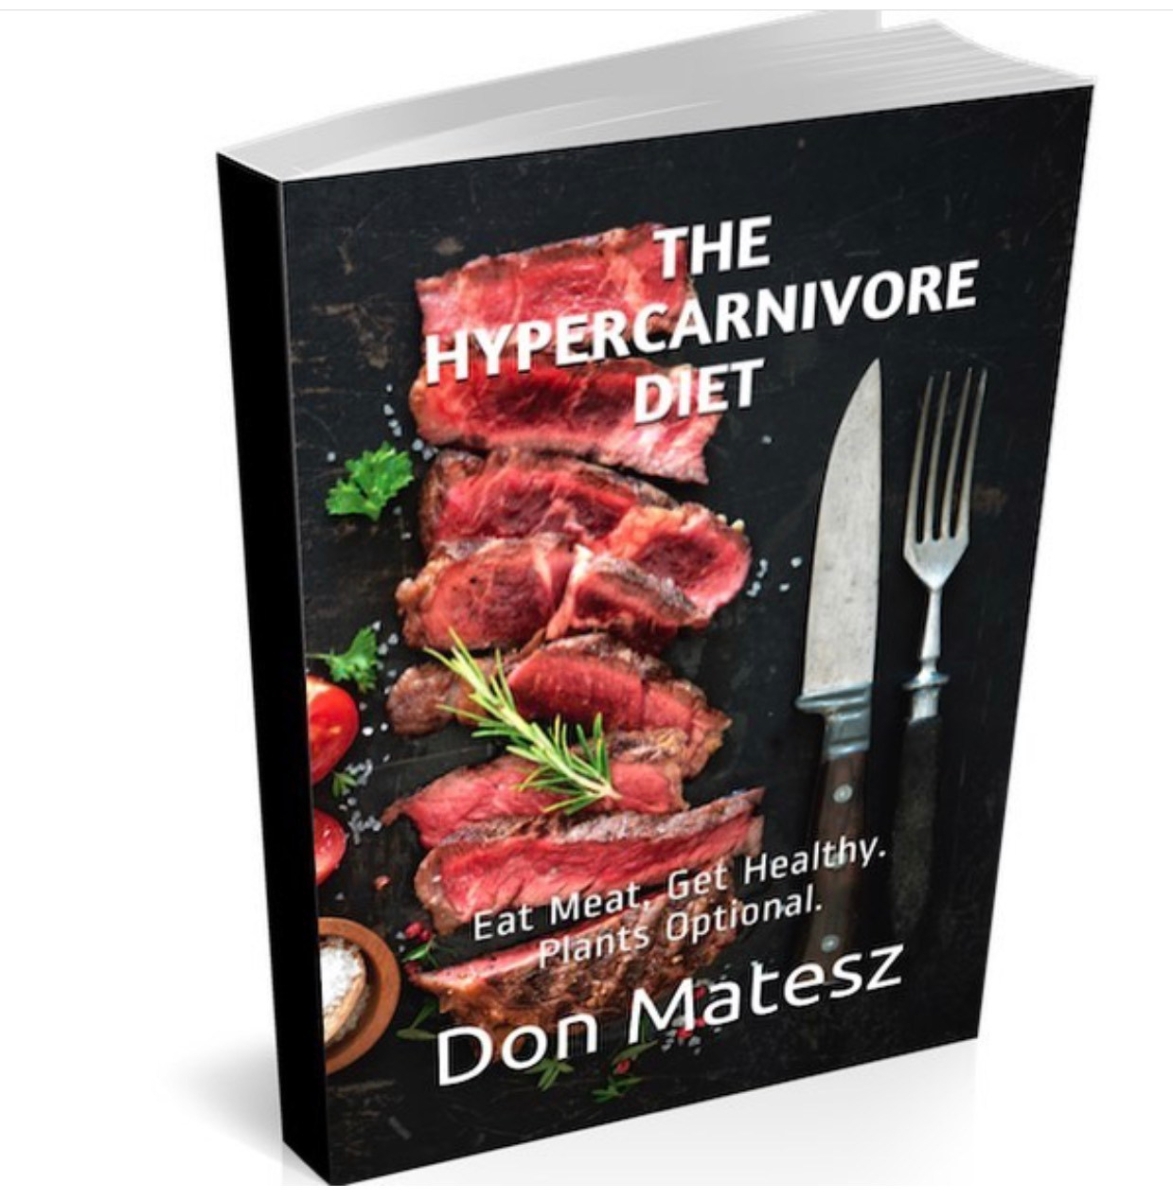 Carnivore Diet success stories – with Don Matesz aka The Hypercarnivore ...